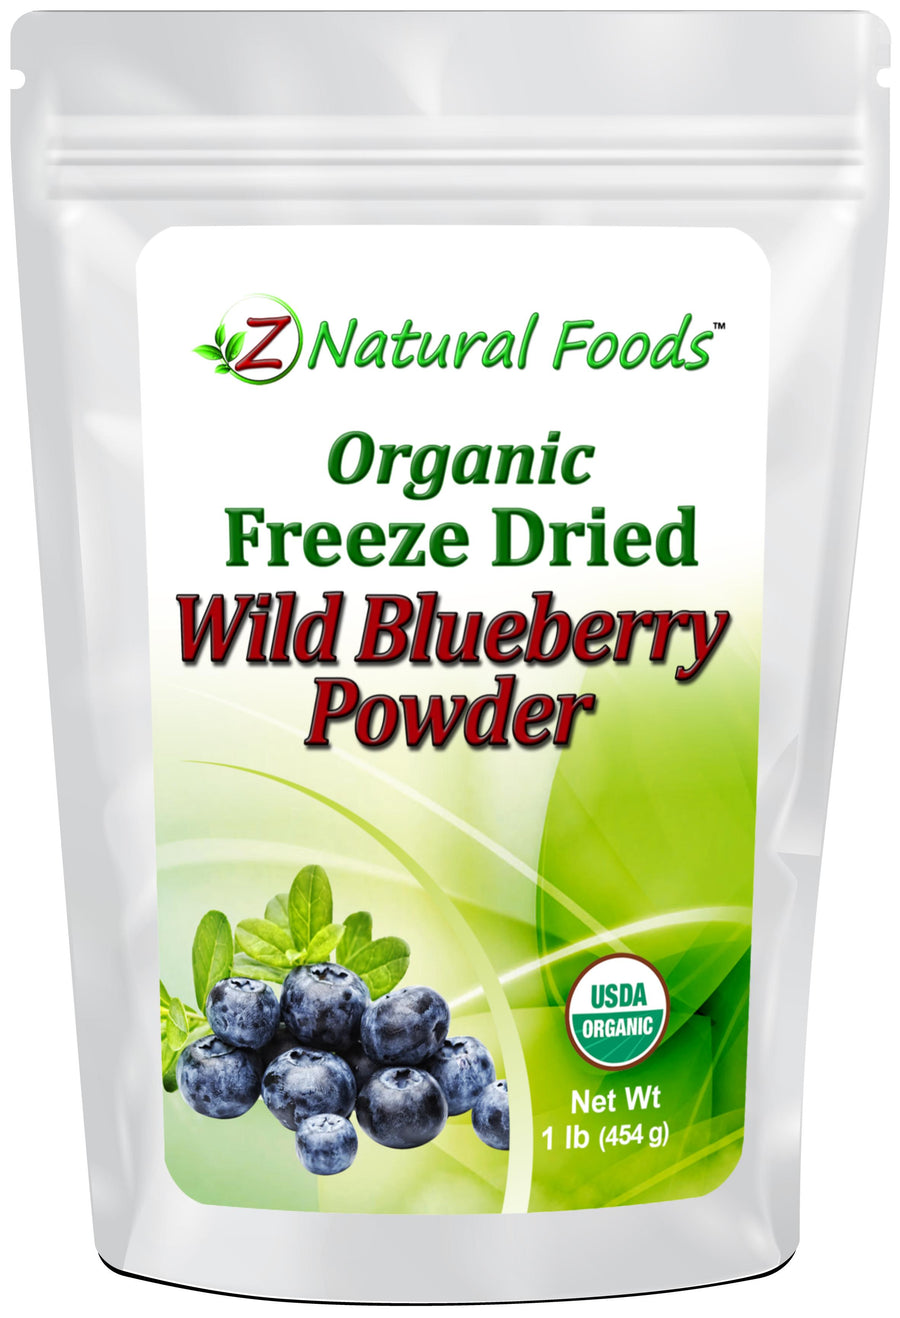 Front bag image of Blueberry Powder - Organic Freeze Dried - (Wild) from Z Natural Foods 1 lb 